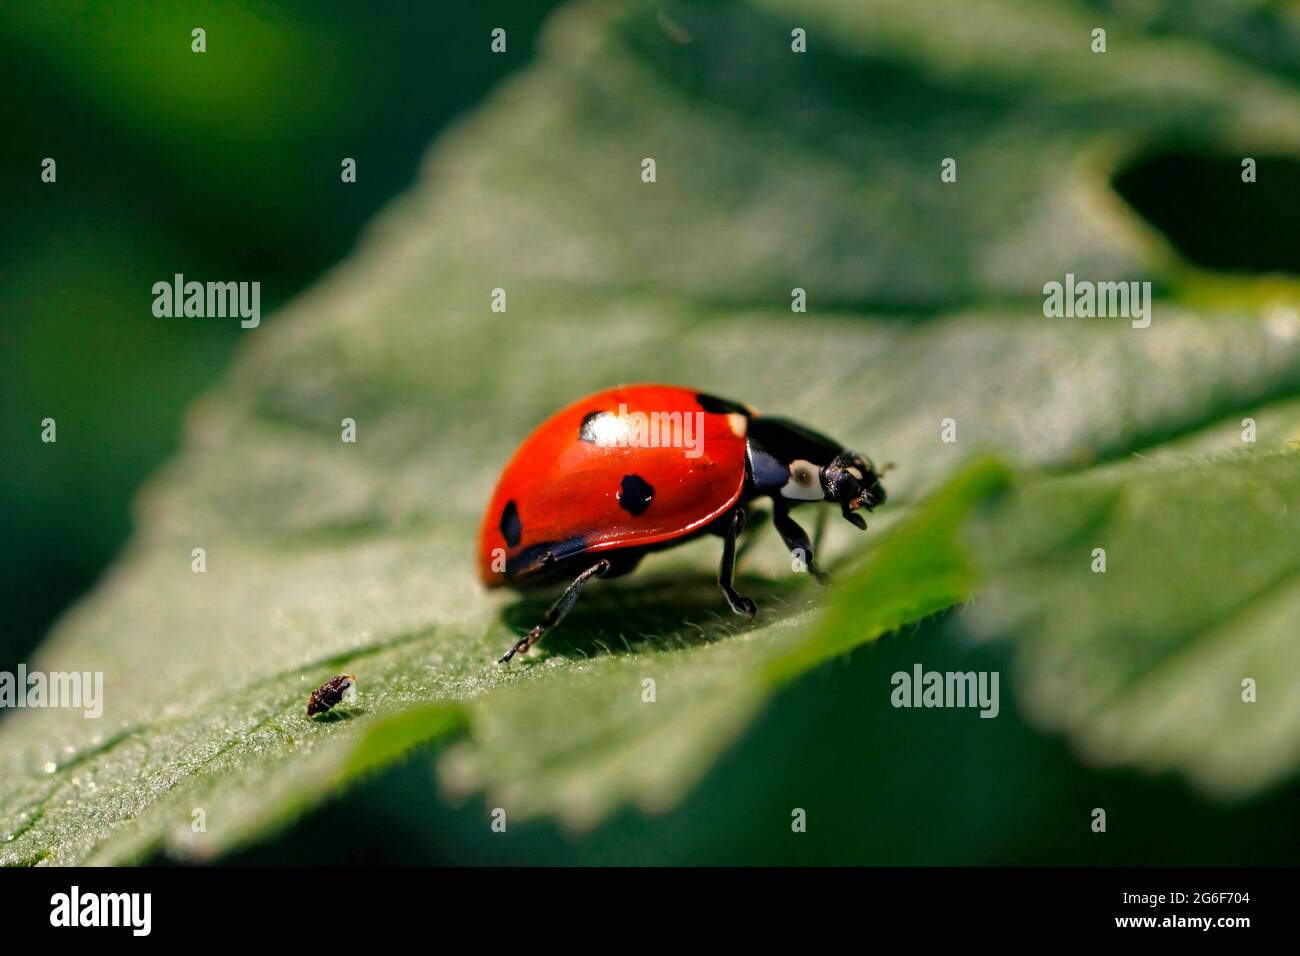 Close view of a ladybug insect on a green leaf. Stock Photo